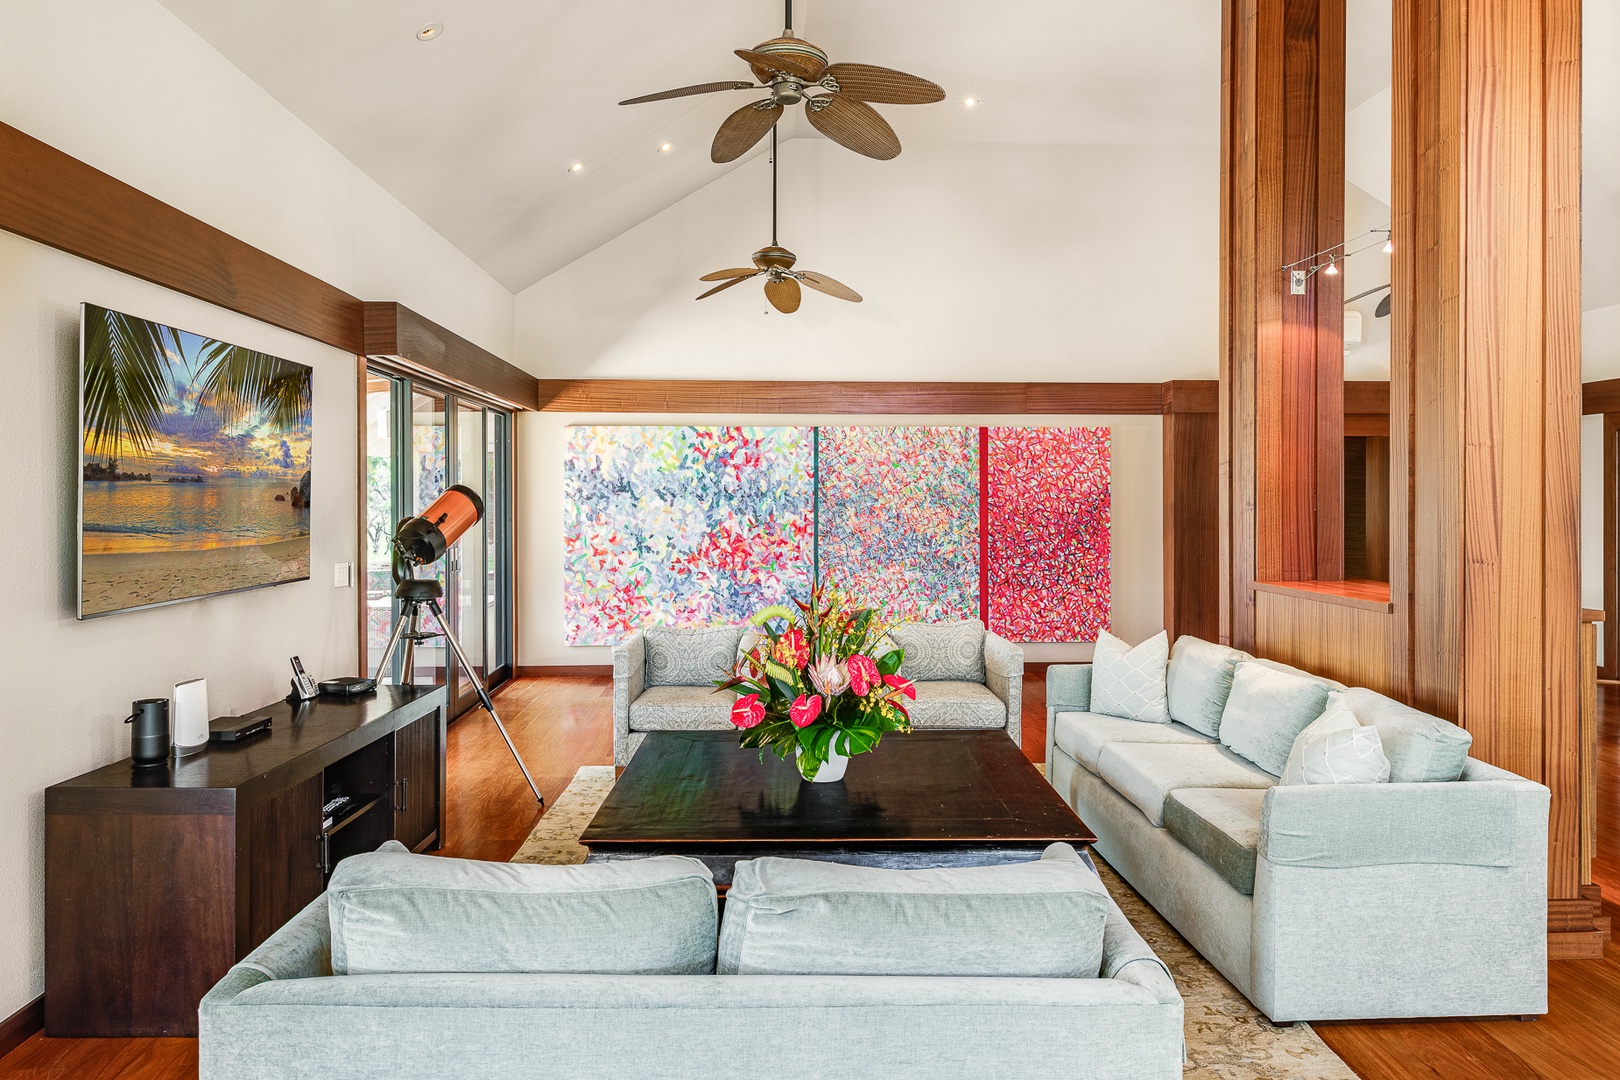 Kamuela Vacation Rentals, Olomana Hale at Kohala Ranch - The living area is the perfect place to gather and chat with family and friends